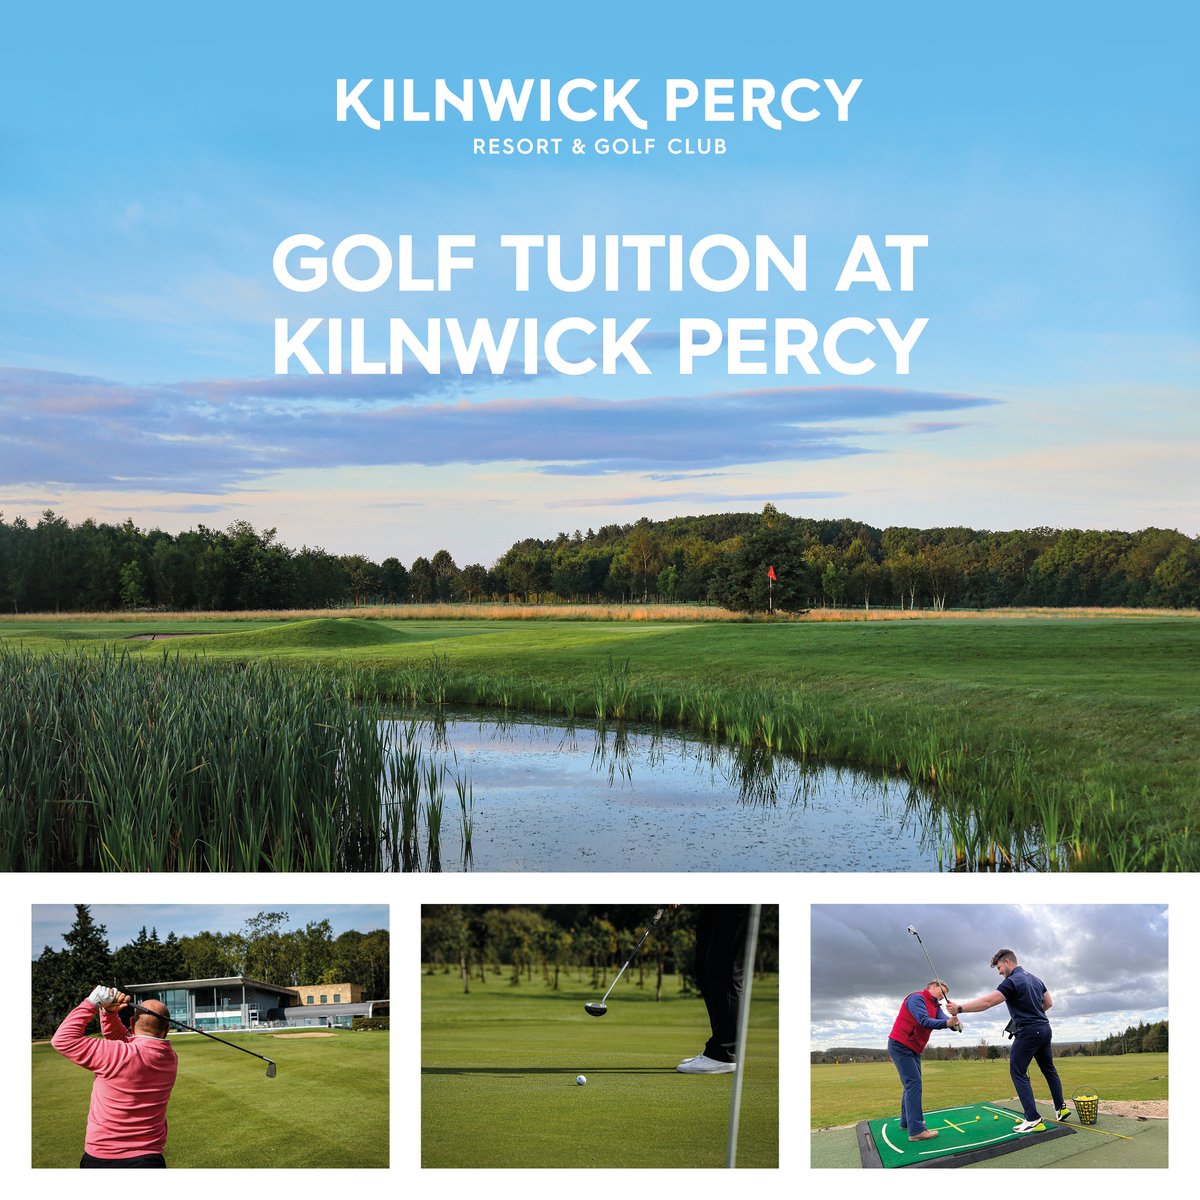 Professional Golf Tuition is available for both members and visitors. For more information contact the golf team on 01759 303090 (opt 3) or call into the golf shop #golfcoach #pgapro #golfinstruction #lovegolf ow.ly/KP0650RqLIm